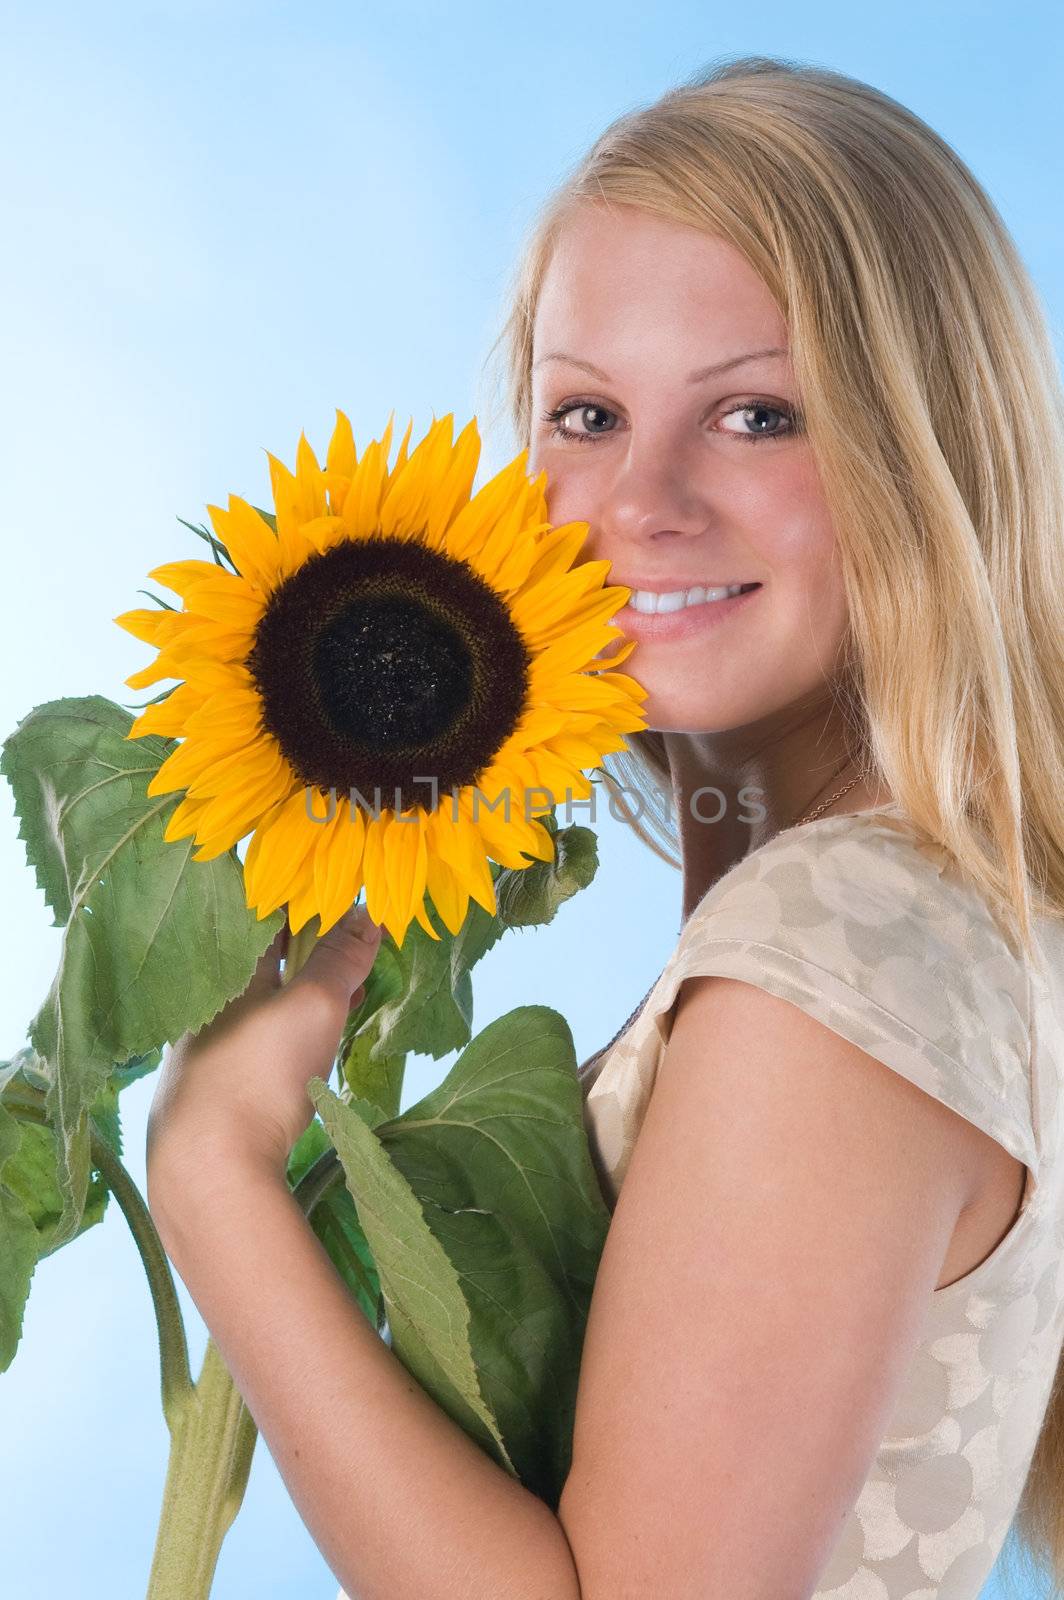 The attractive blonde in studio holds a sunflower in hands